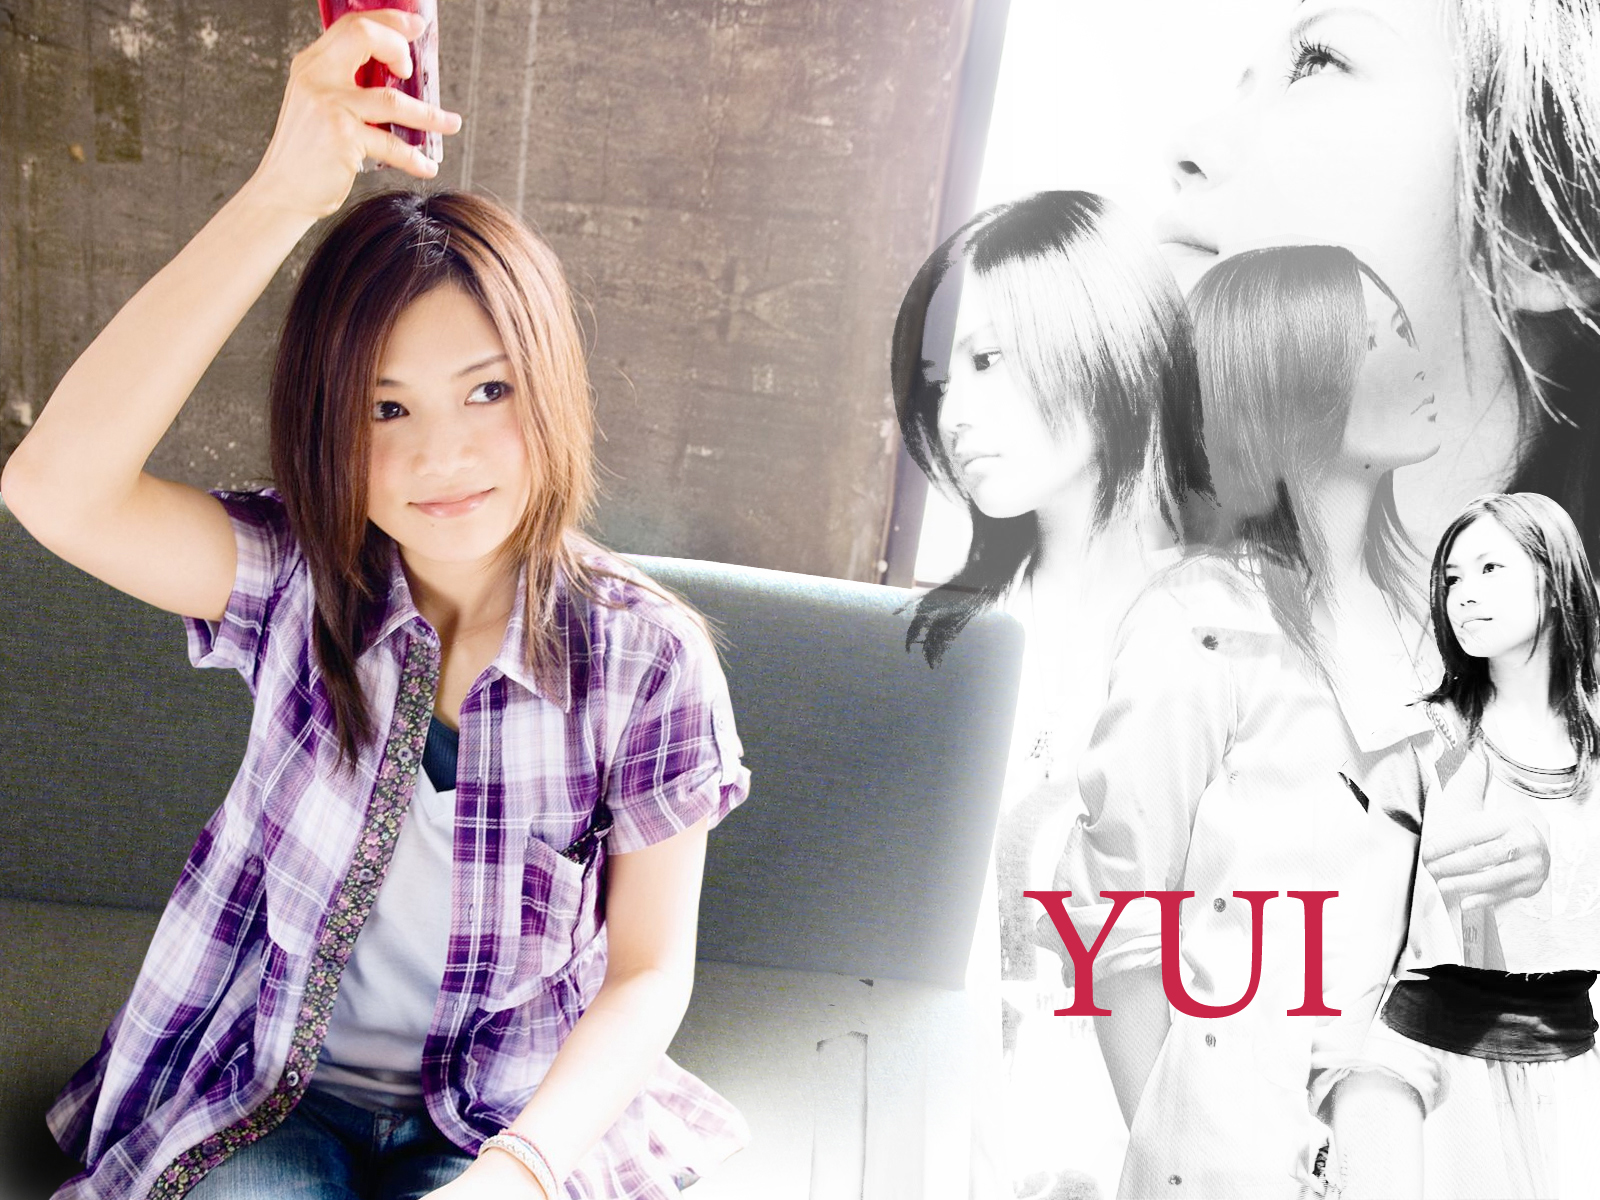 Unofficial Yui Wallpaper Page 2